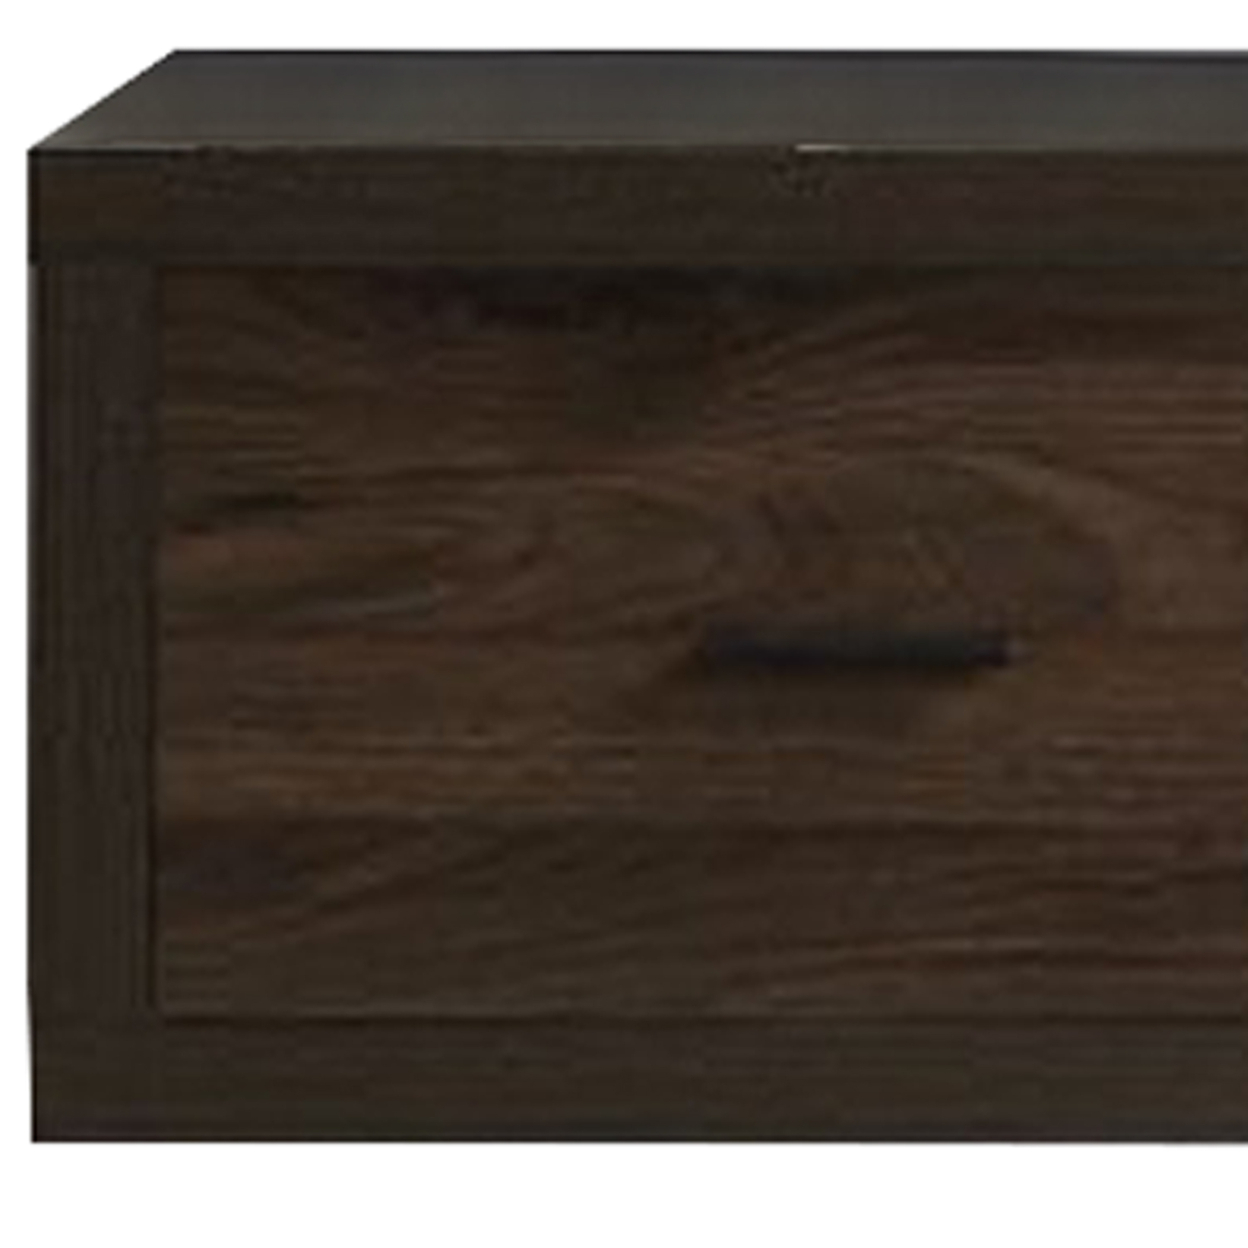 TV Stand With 3 Drawers And Grain Details, Brown- Saltoro Sherpi